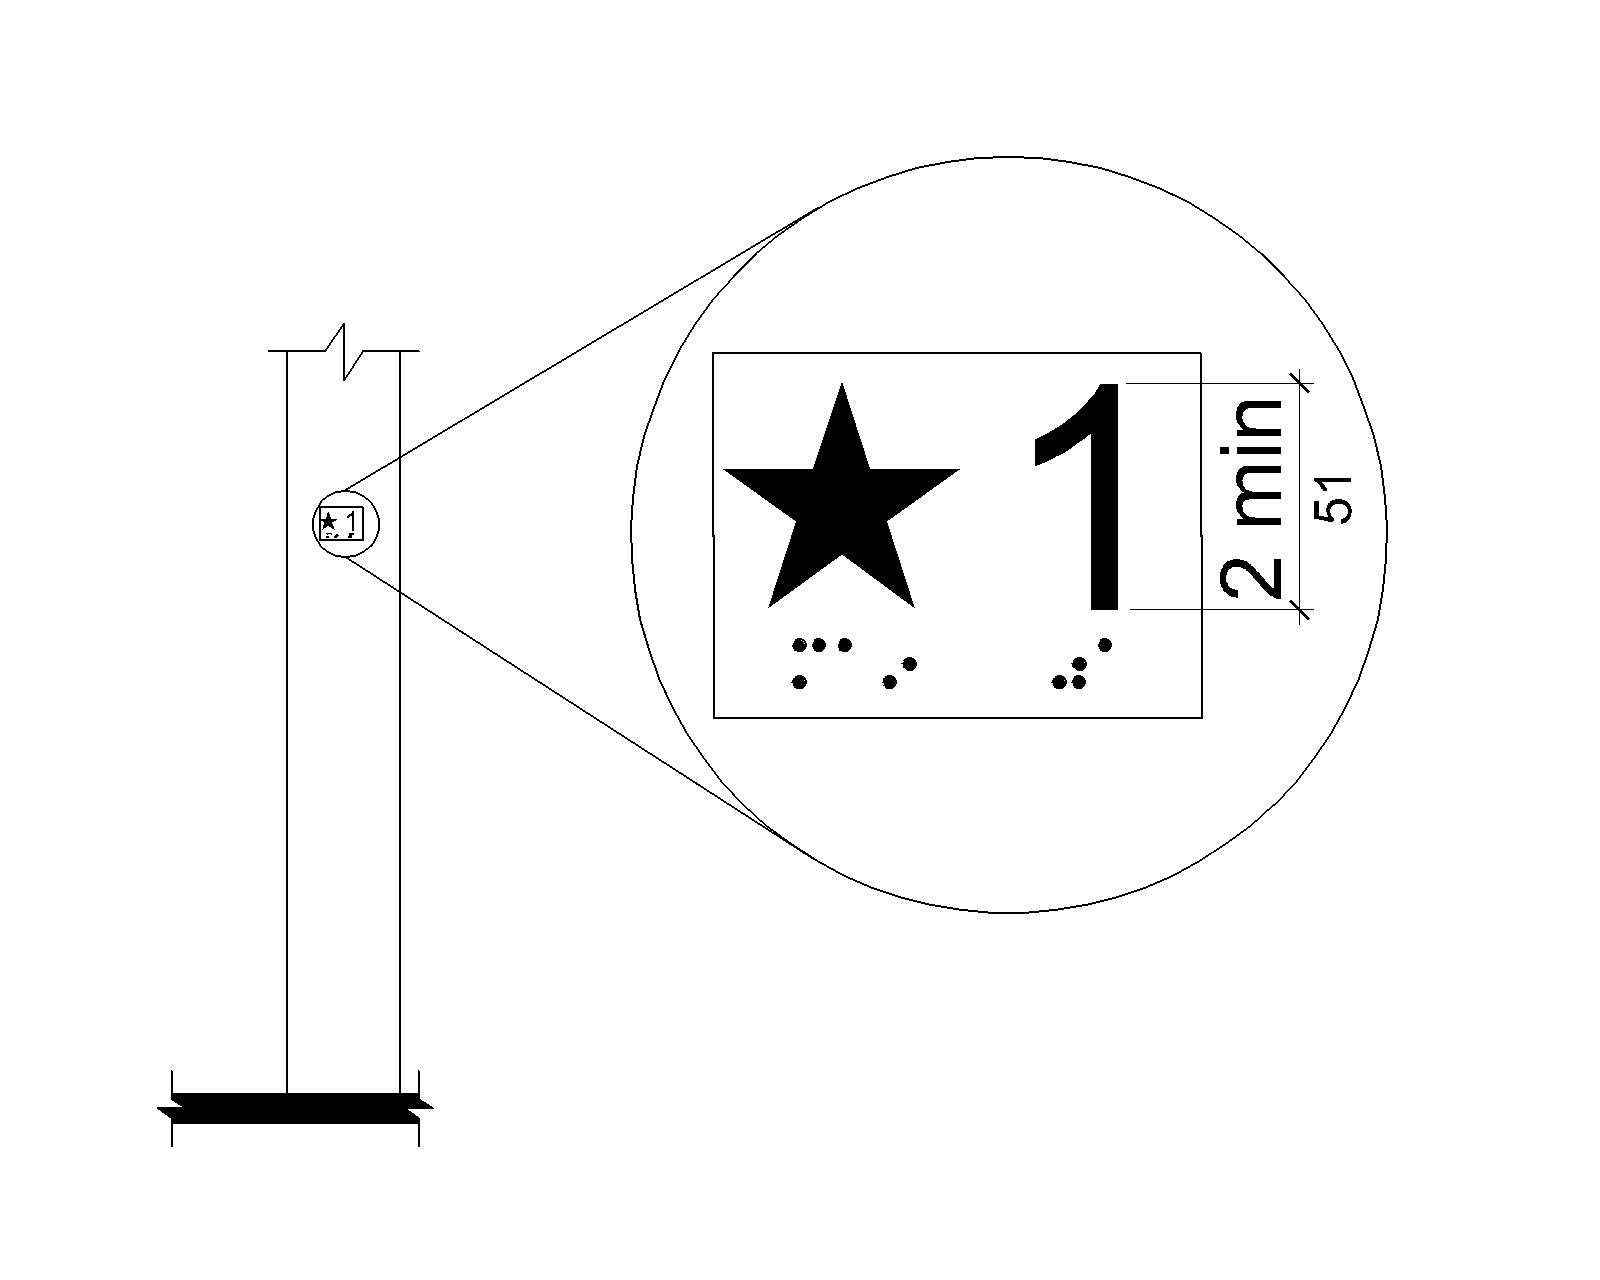 Deck Designations on Elevator Hoistway Entrances. An enlarged detail of a tactile deck designation is shown. The sign contains a star and the number 1 next to it which is 2 inches (51 mm) high; the braille equivalent is provided below each.